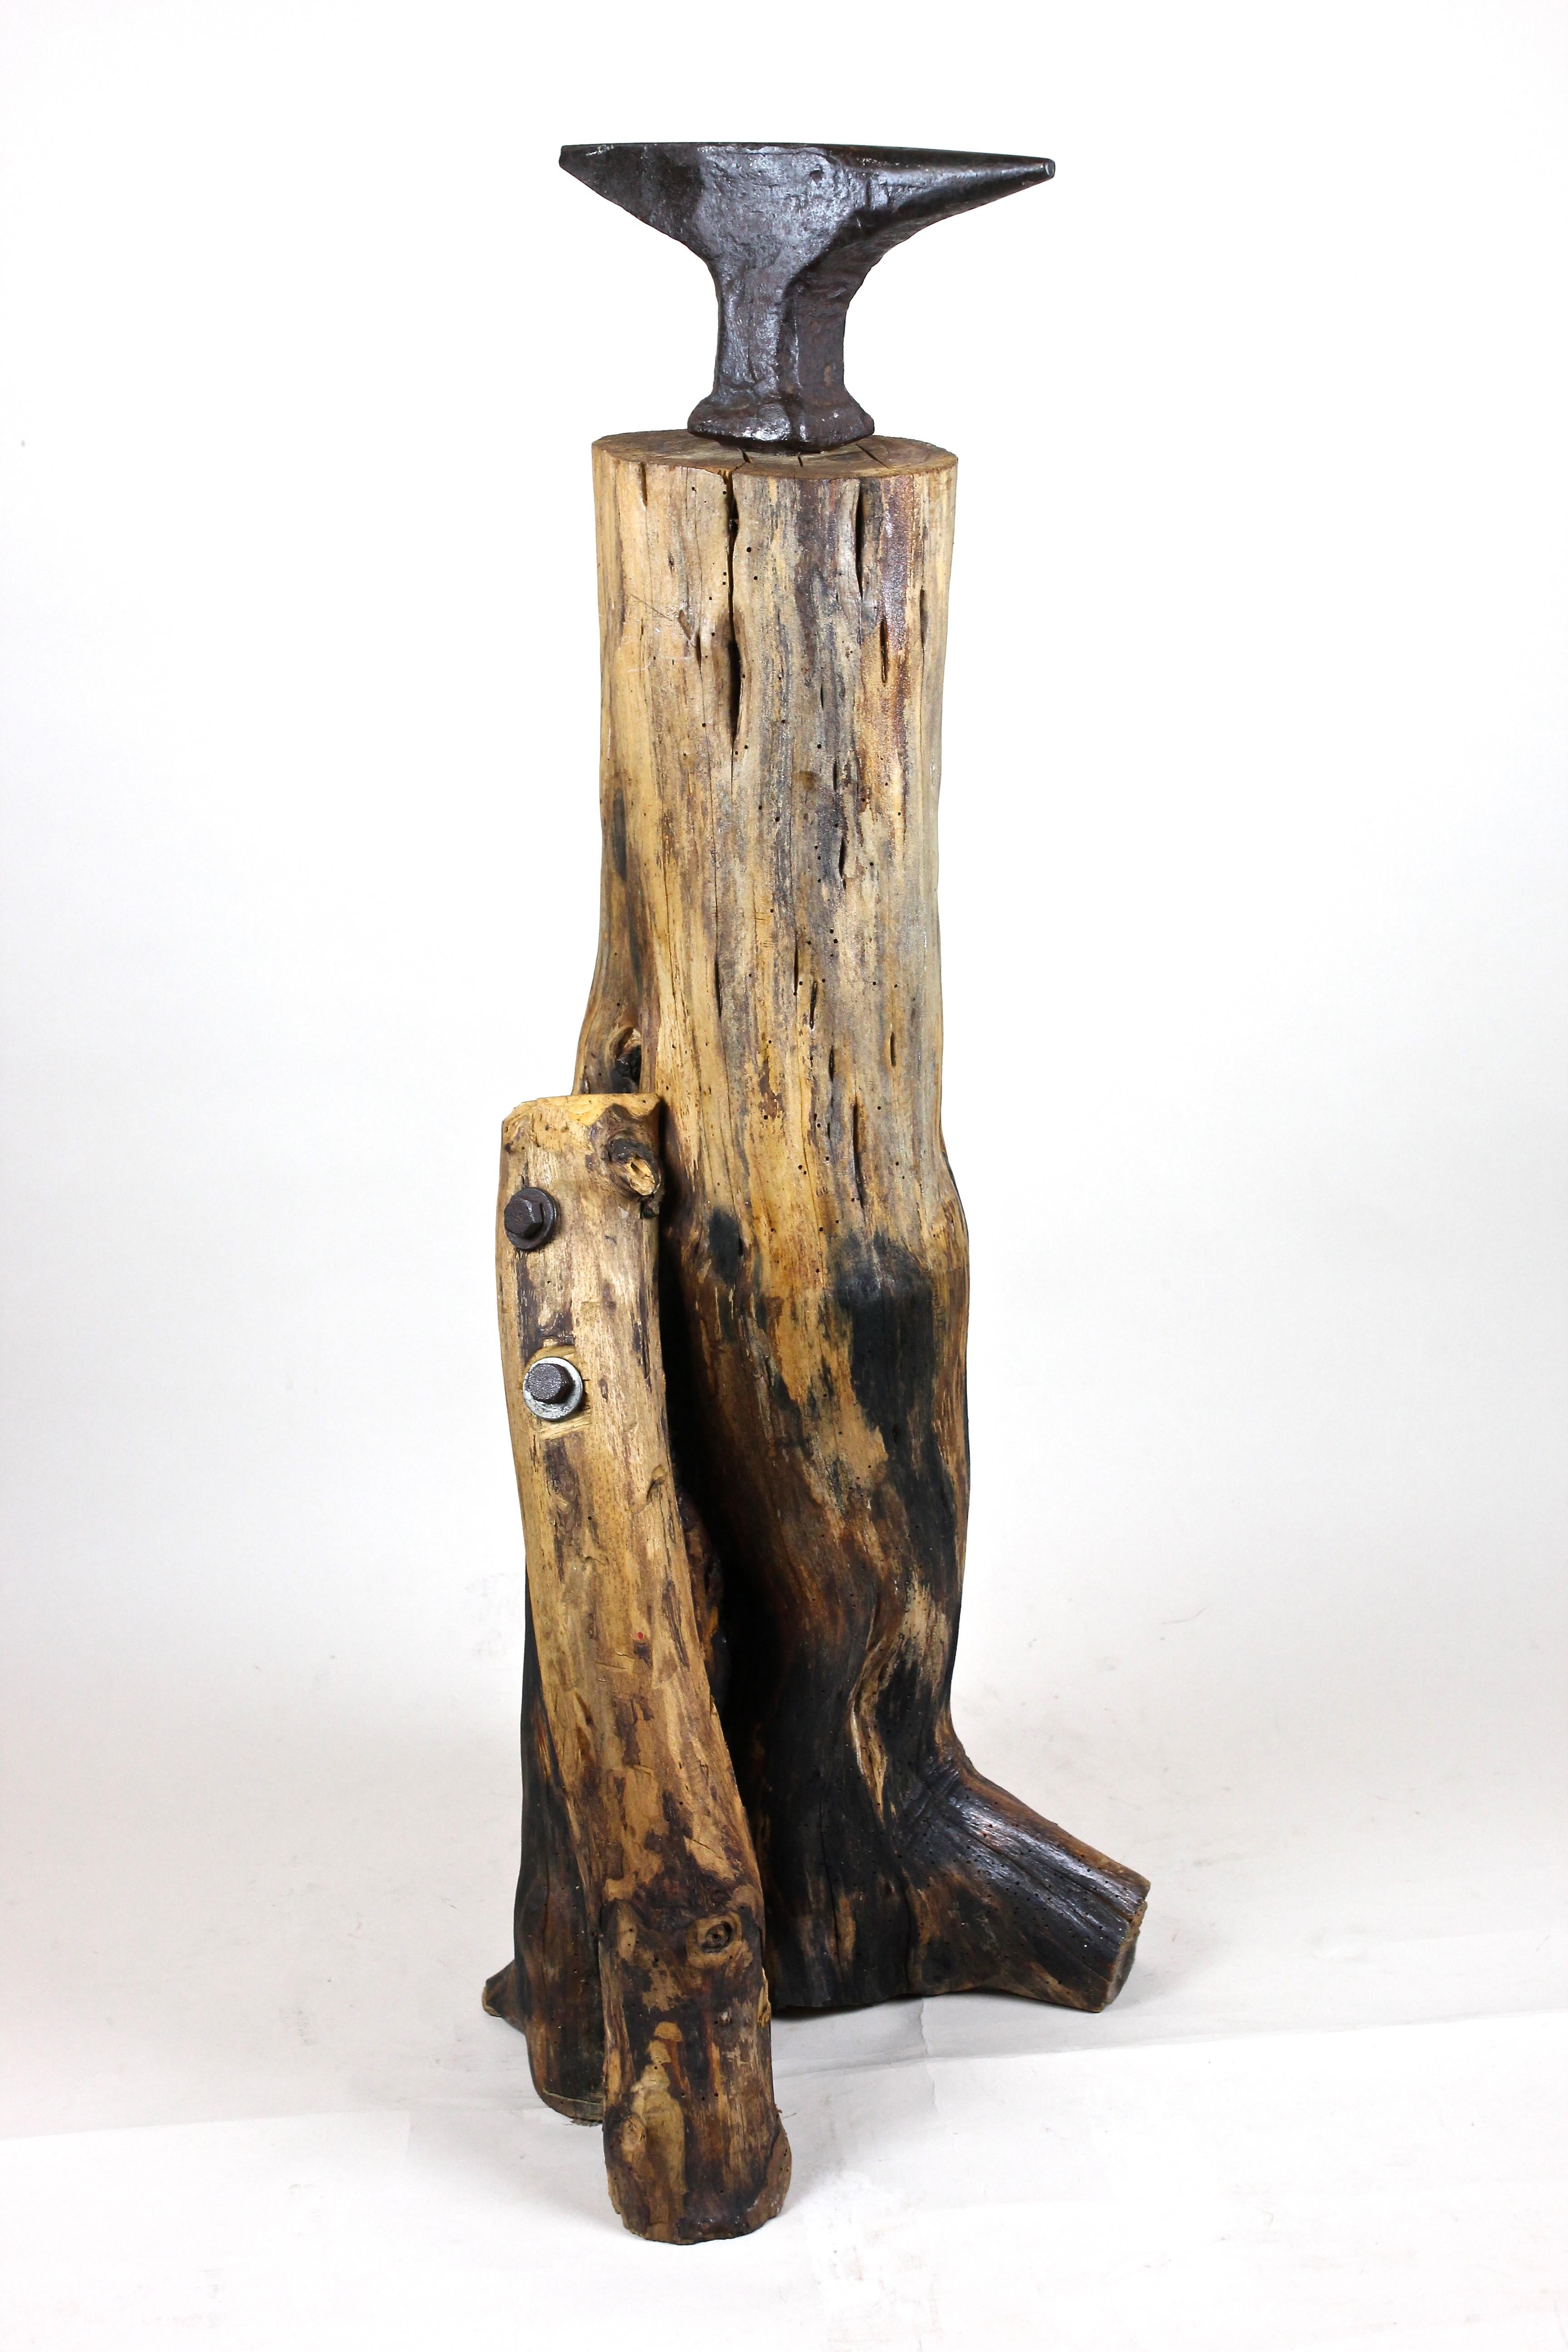 Out of the ordinary early 20th century modern wooden sculpture out of Austria, circa 1915-1920. This large abstract sculpture impresses with its unusual formed massive wooden tree Stand which got the perfect Stand through an artfully added branch.